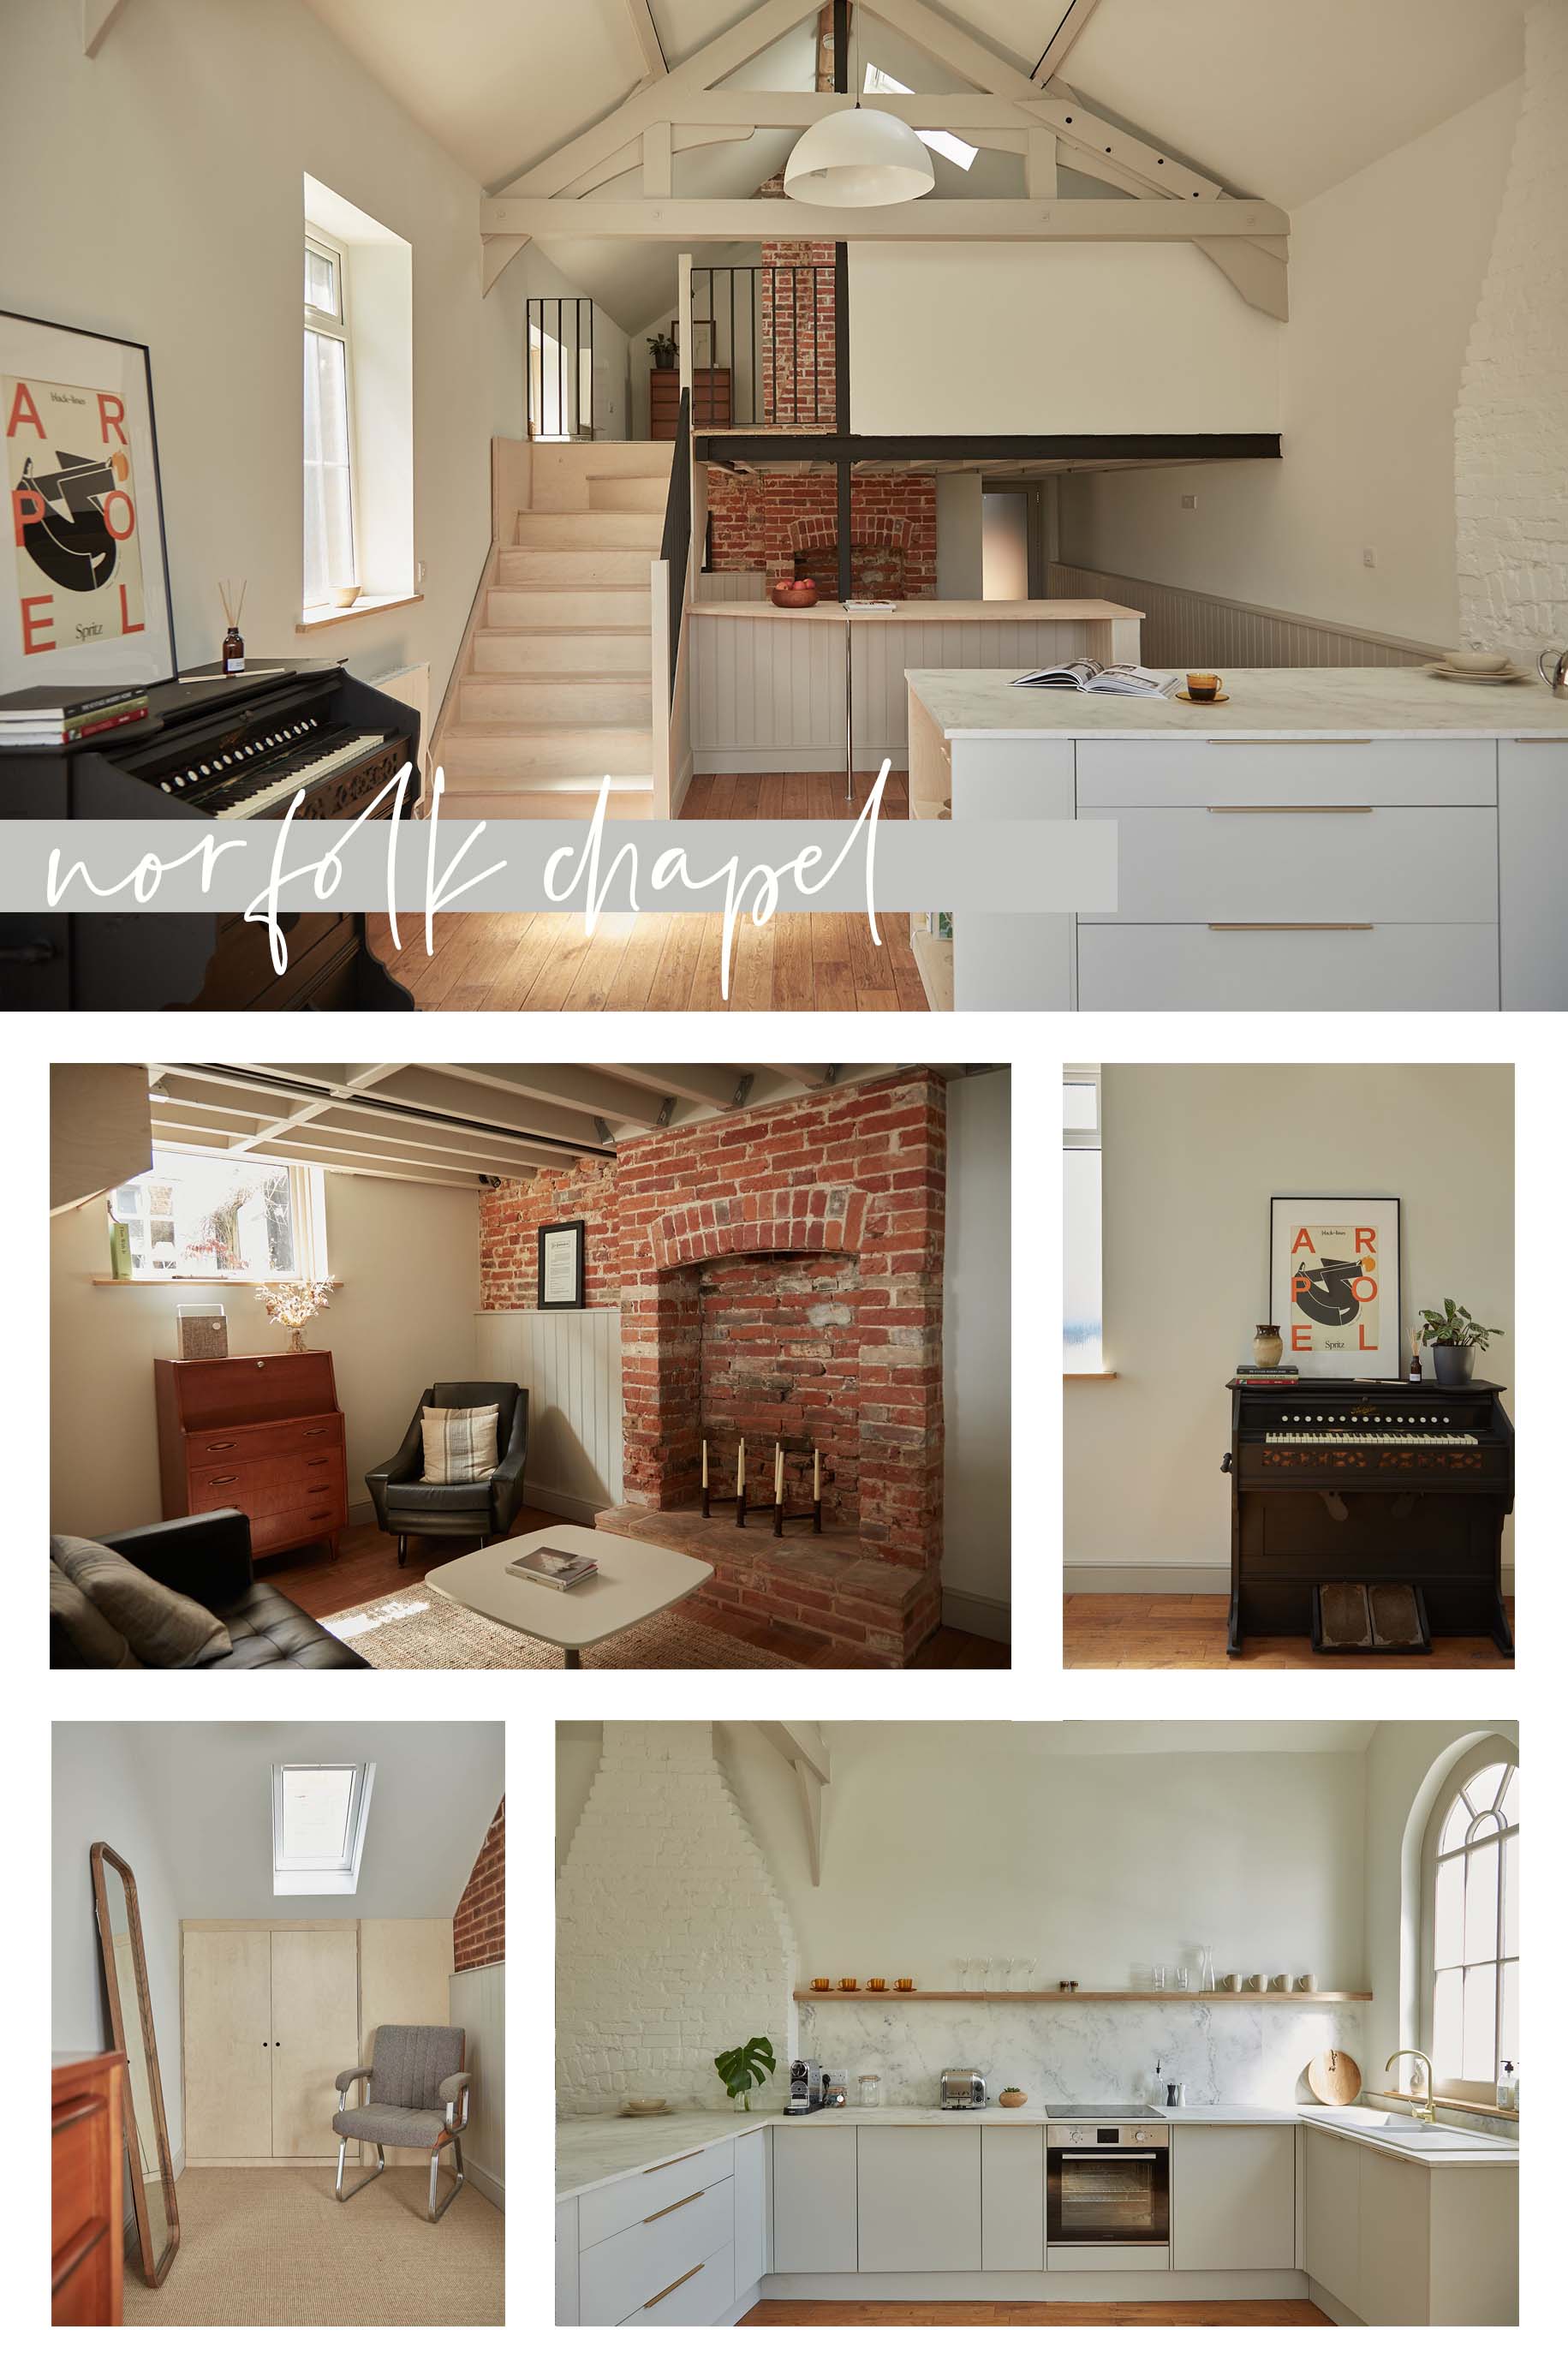 A beautifully renovated Chapel in Norfolk makes for a gorgeous photoshoot location house.